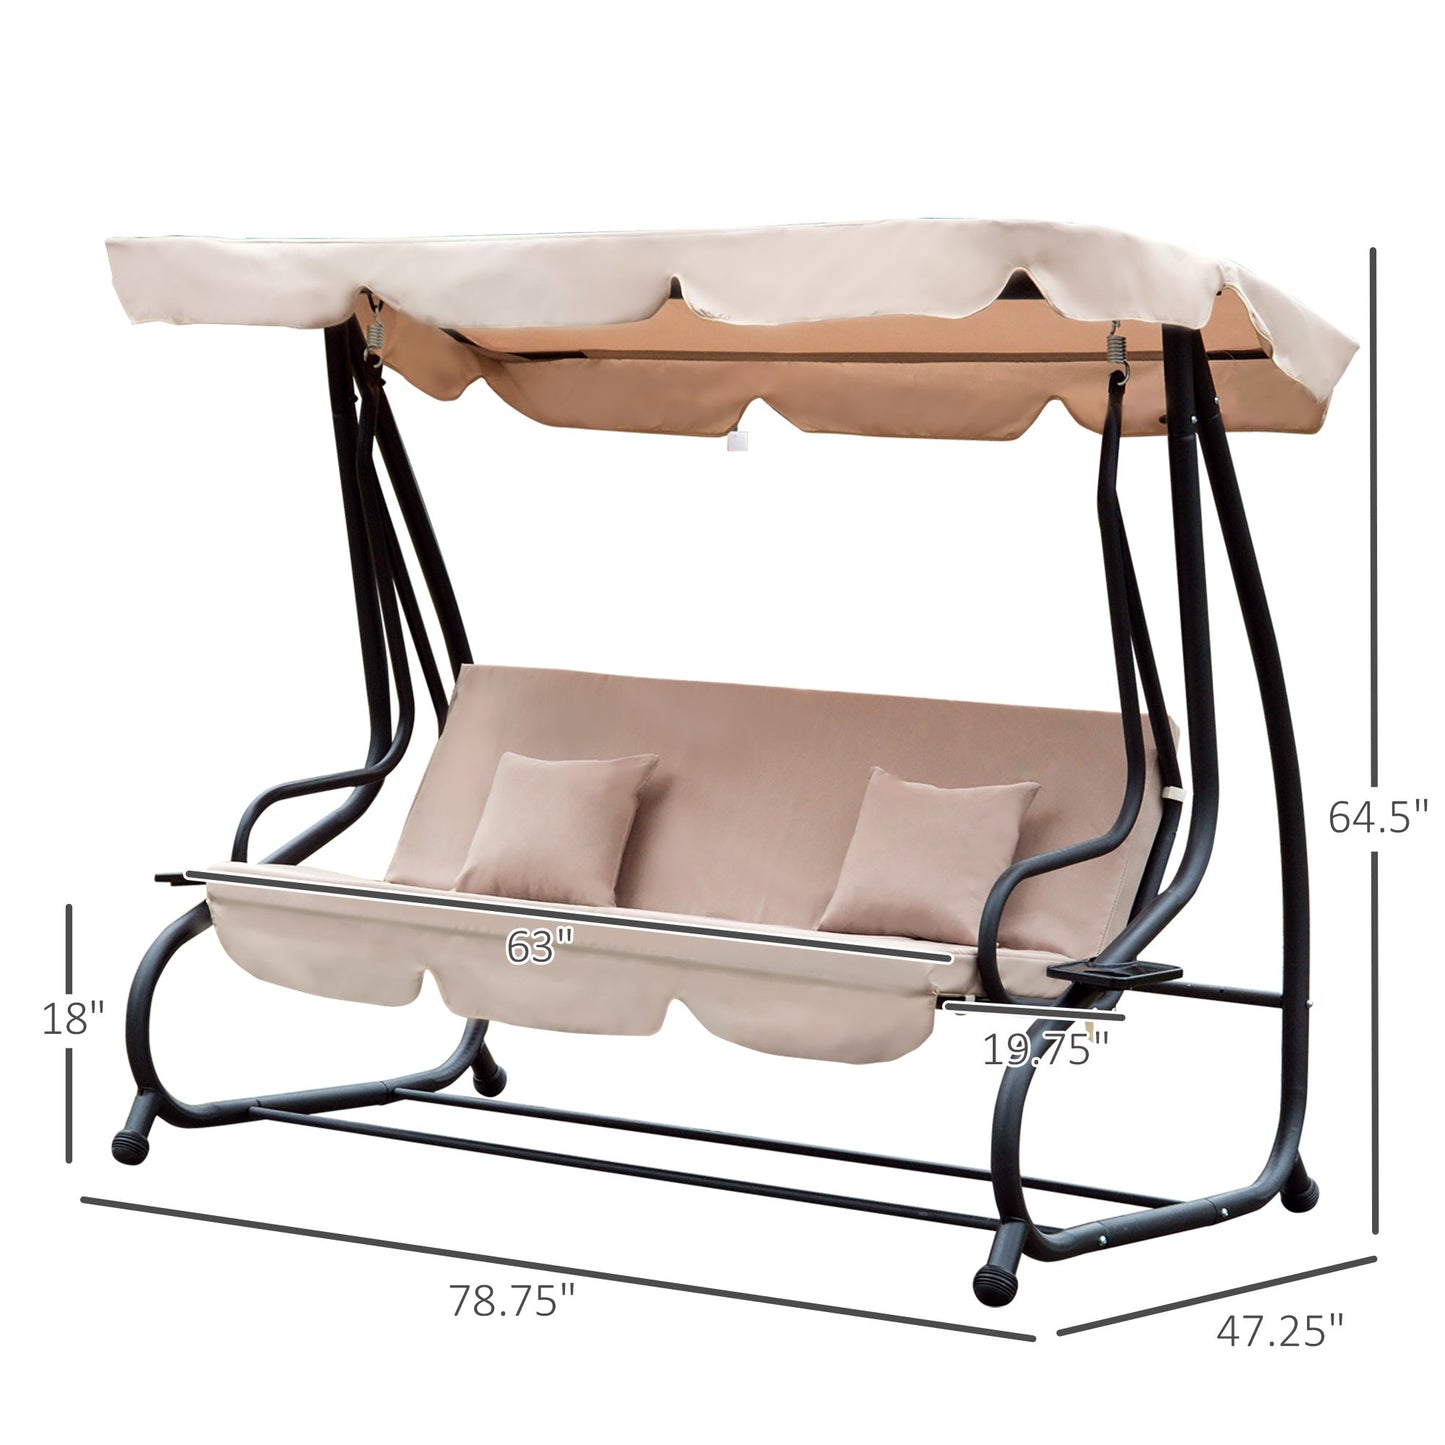 Outdoor and Garden-3 Seat Outdoor Free Standing Swing Bench Porch Swing with Stand, Comfortable Cushioned Fabric & Included Canopy, Light Brown - Outdoor Style Company